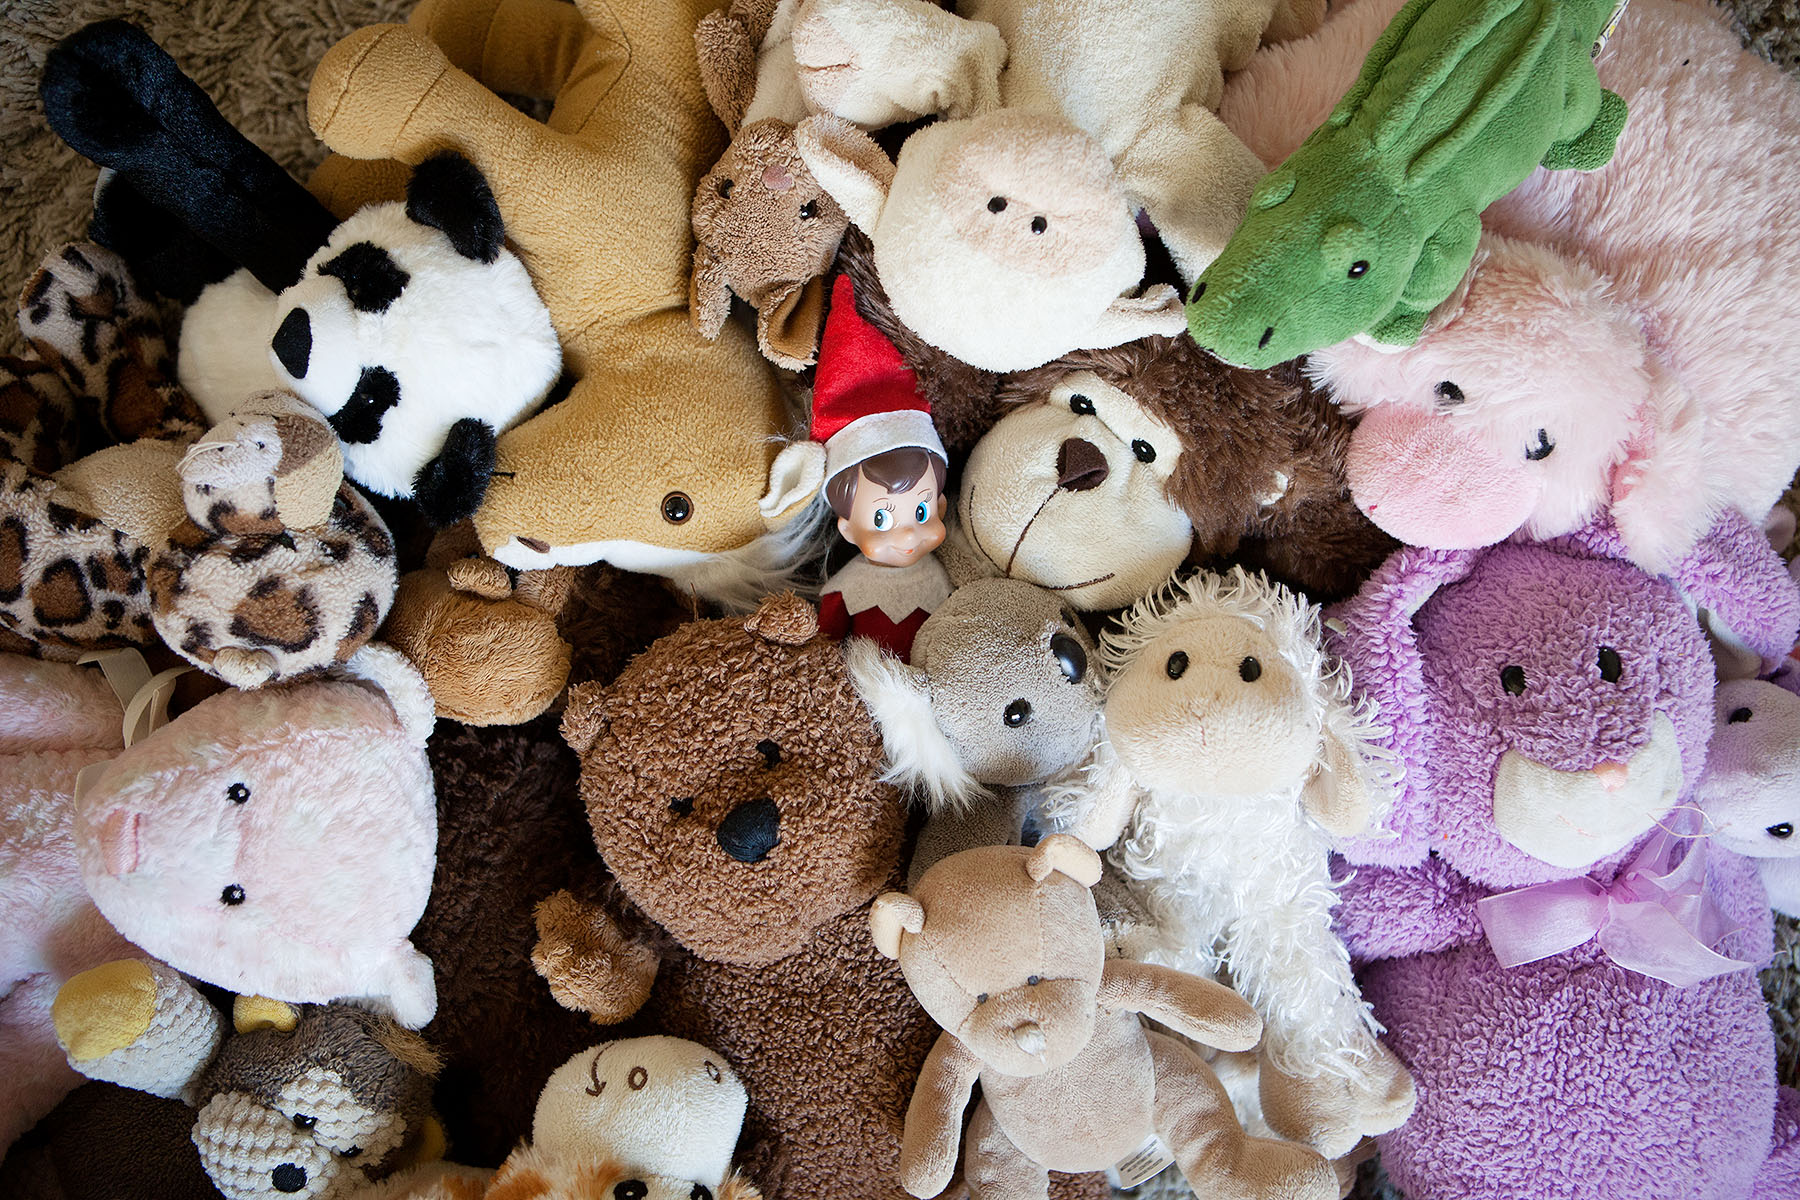 Elf hides in a pile of stuffed animals.